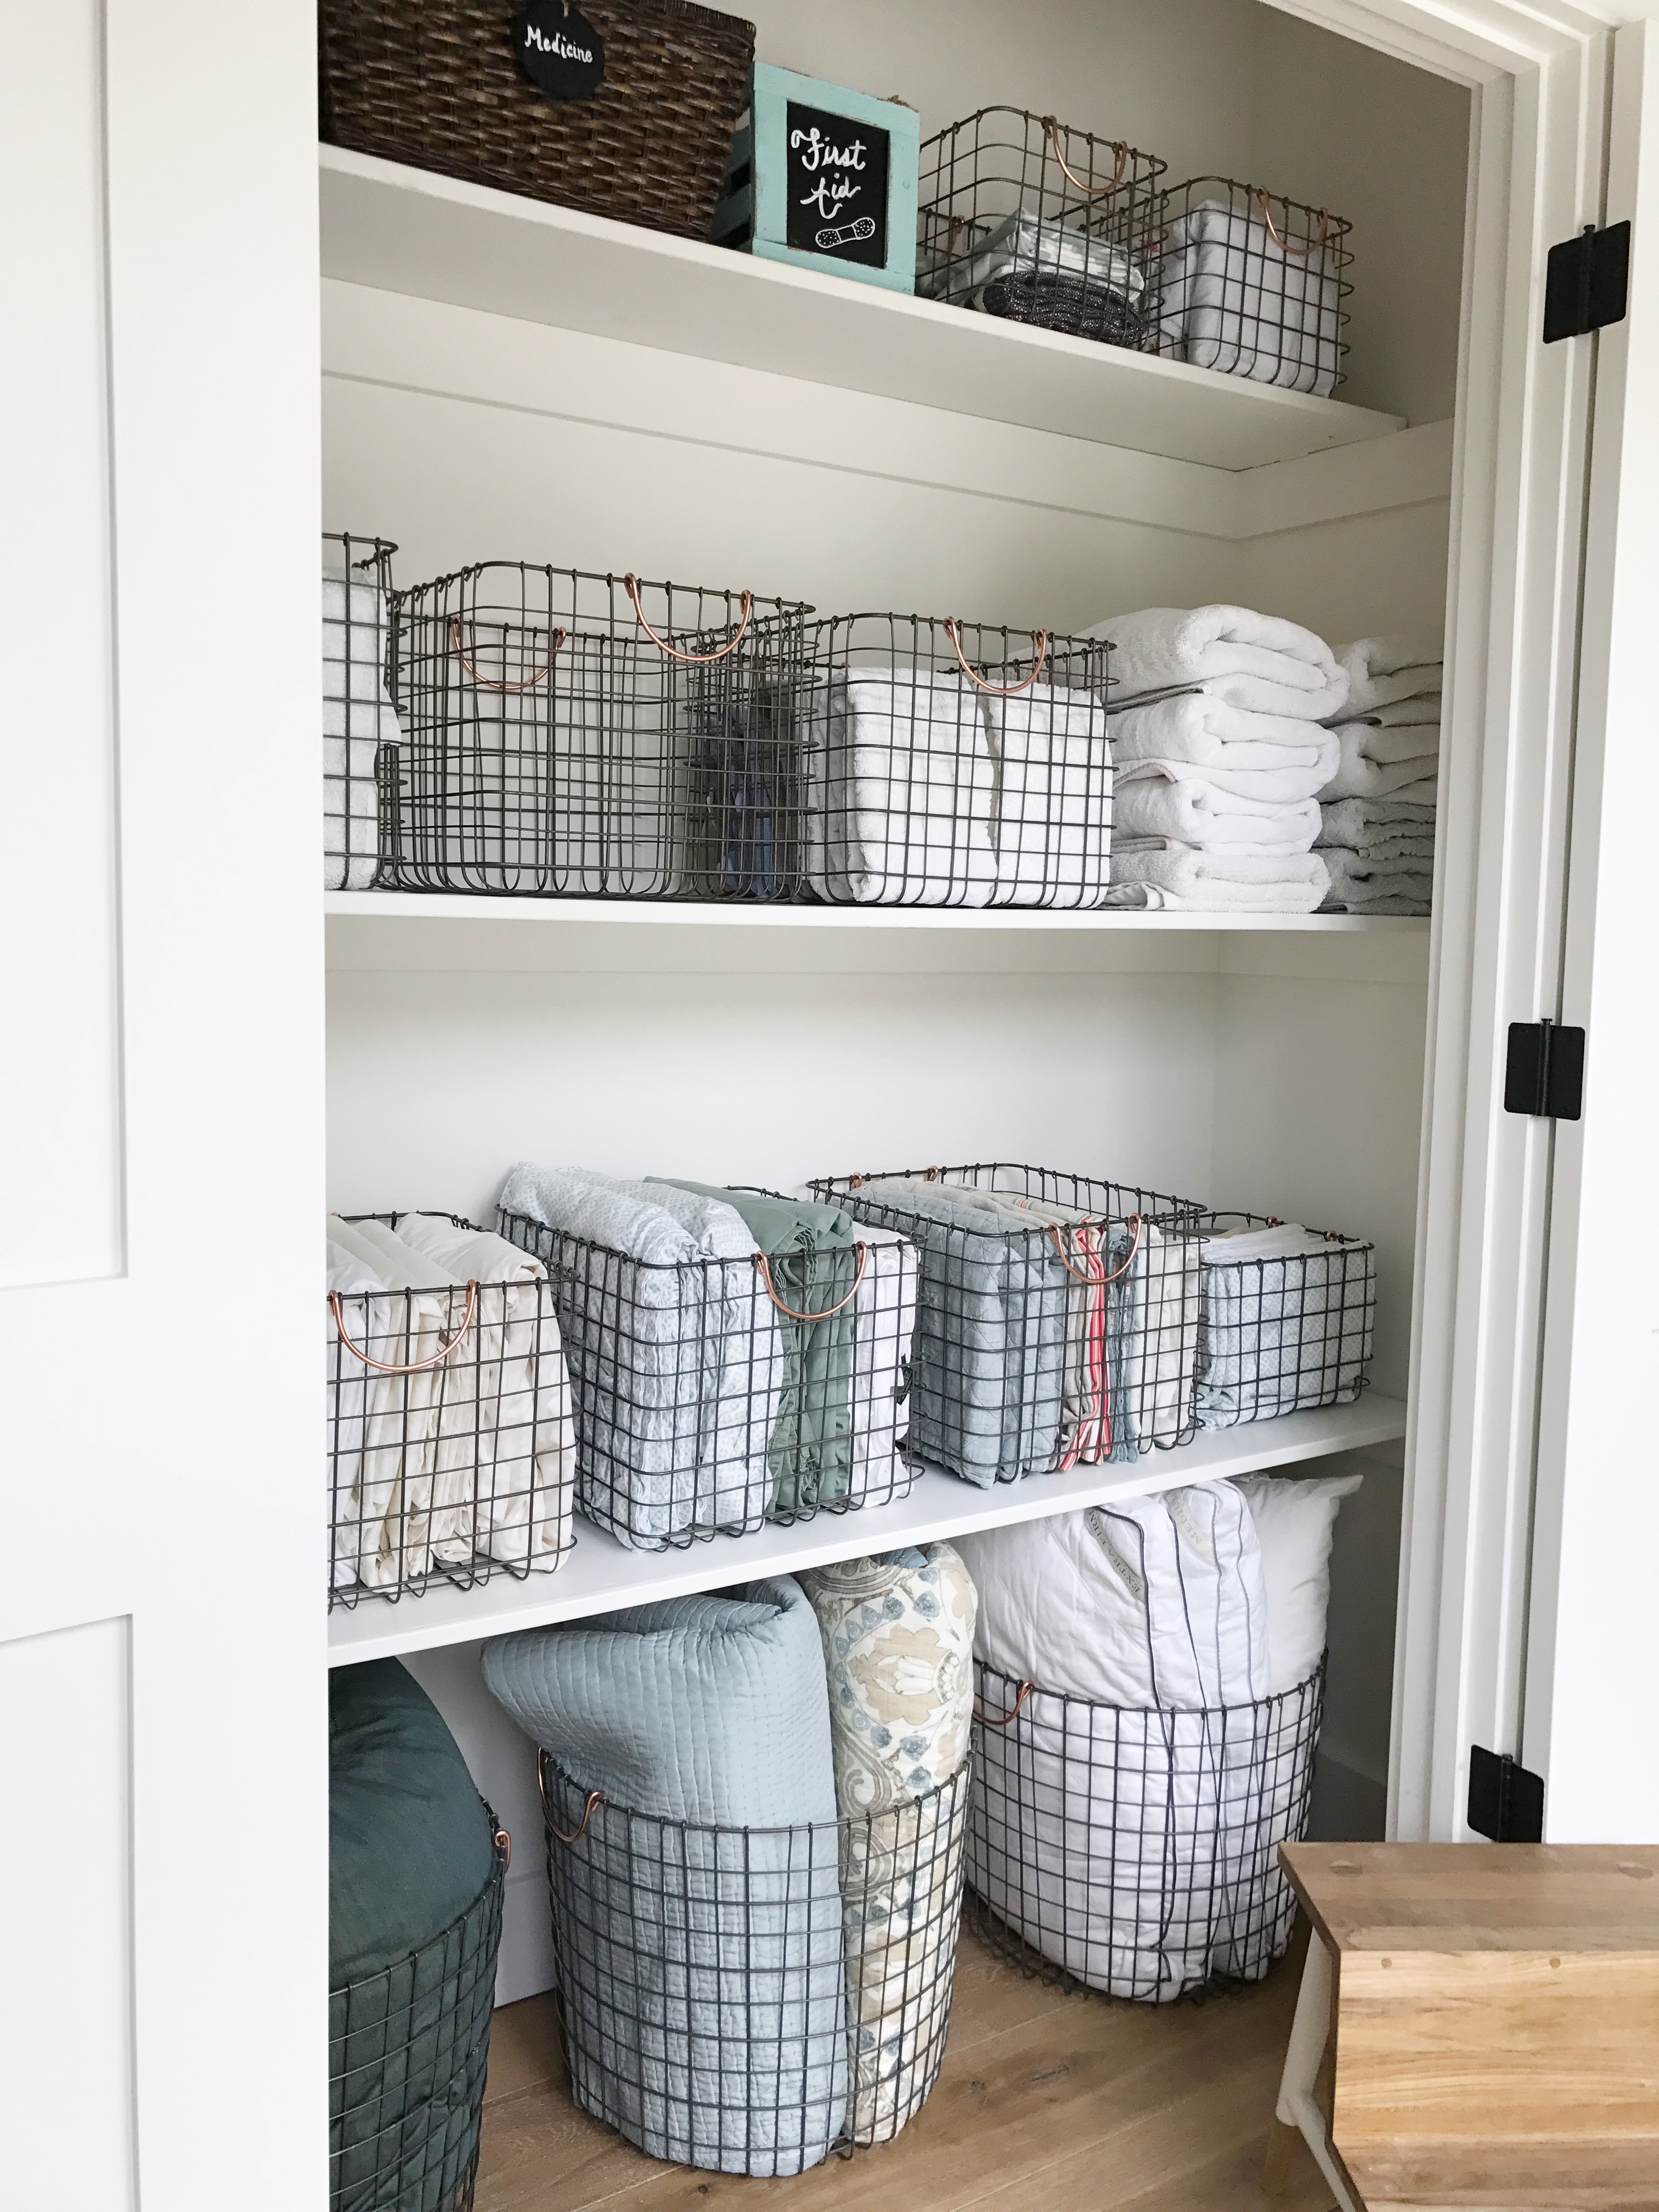 How To Label Sheets In Linen Closet